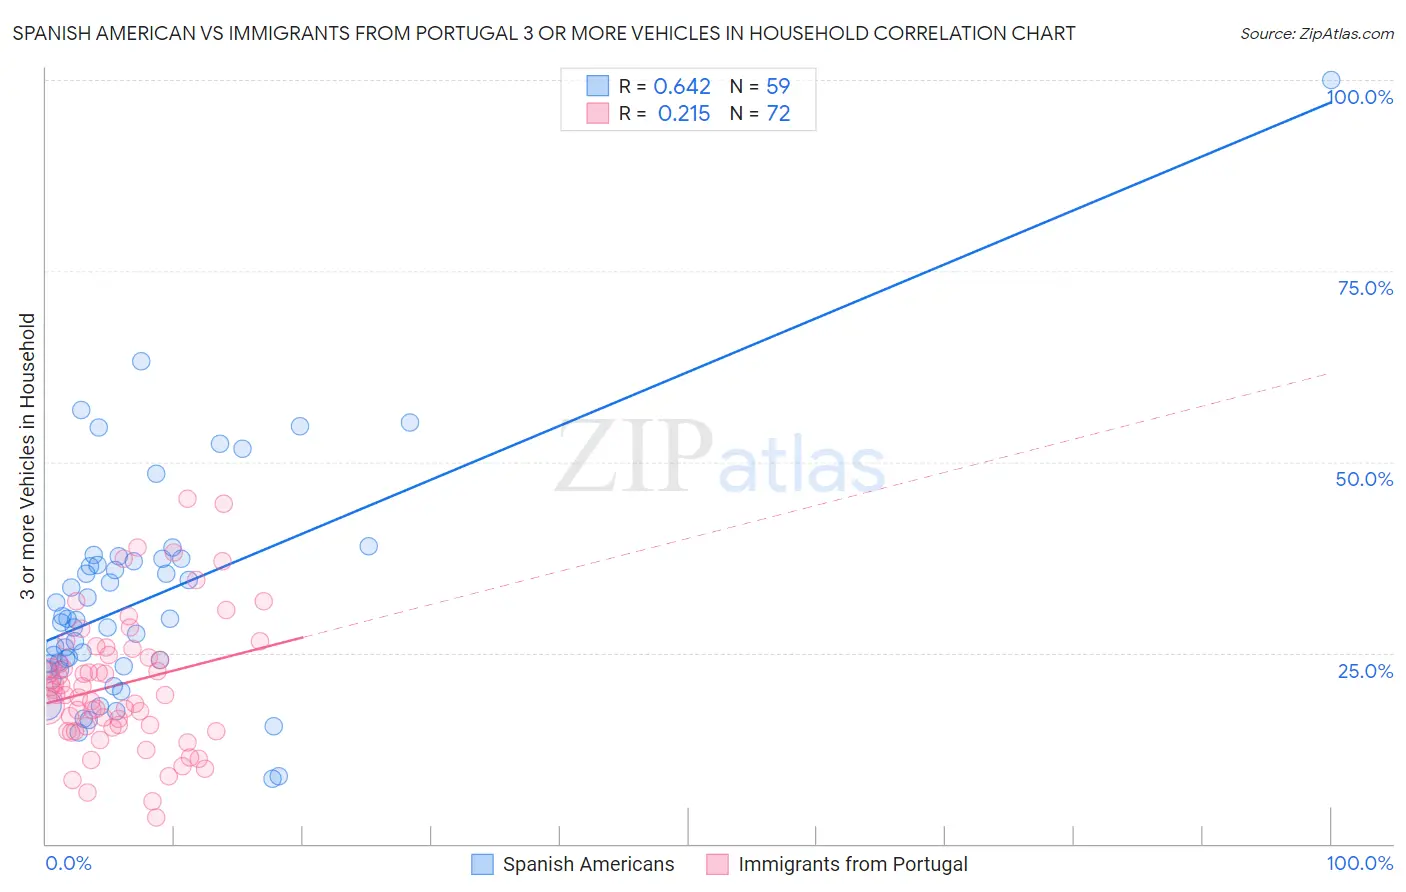 Spanish American vs Immigrants from Portugal 3 or more Vehicles in Household